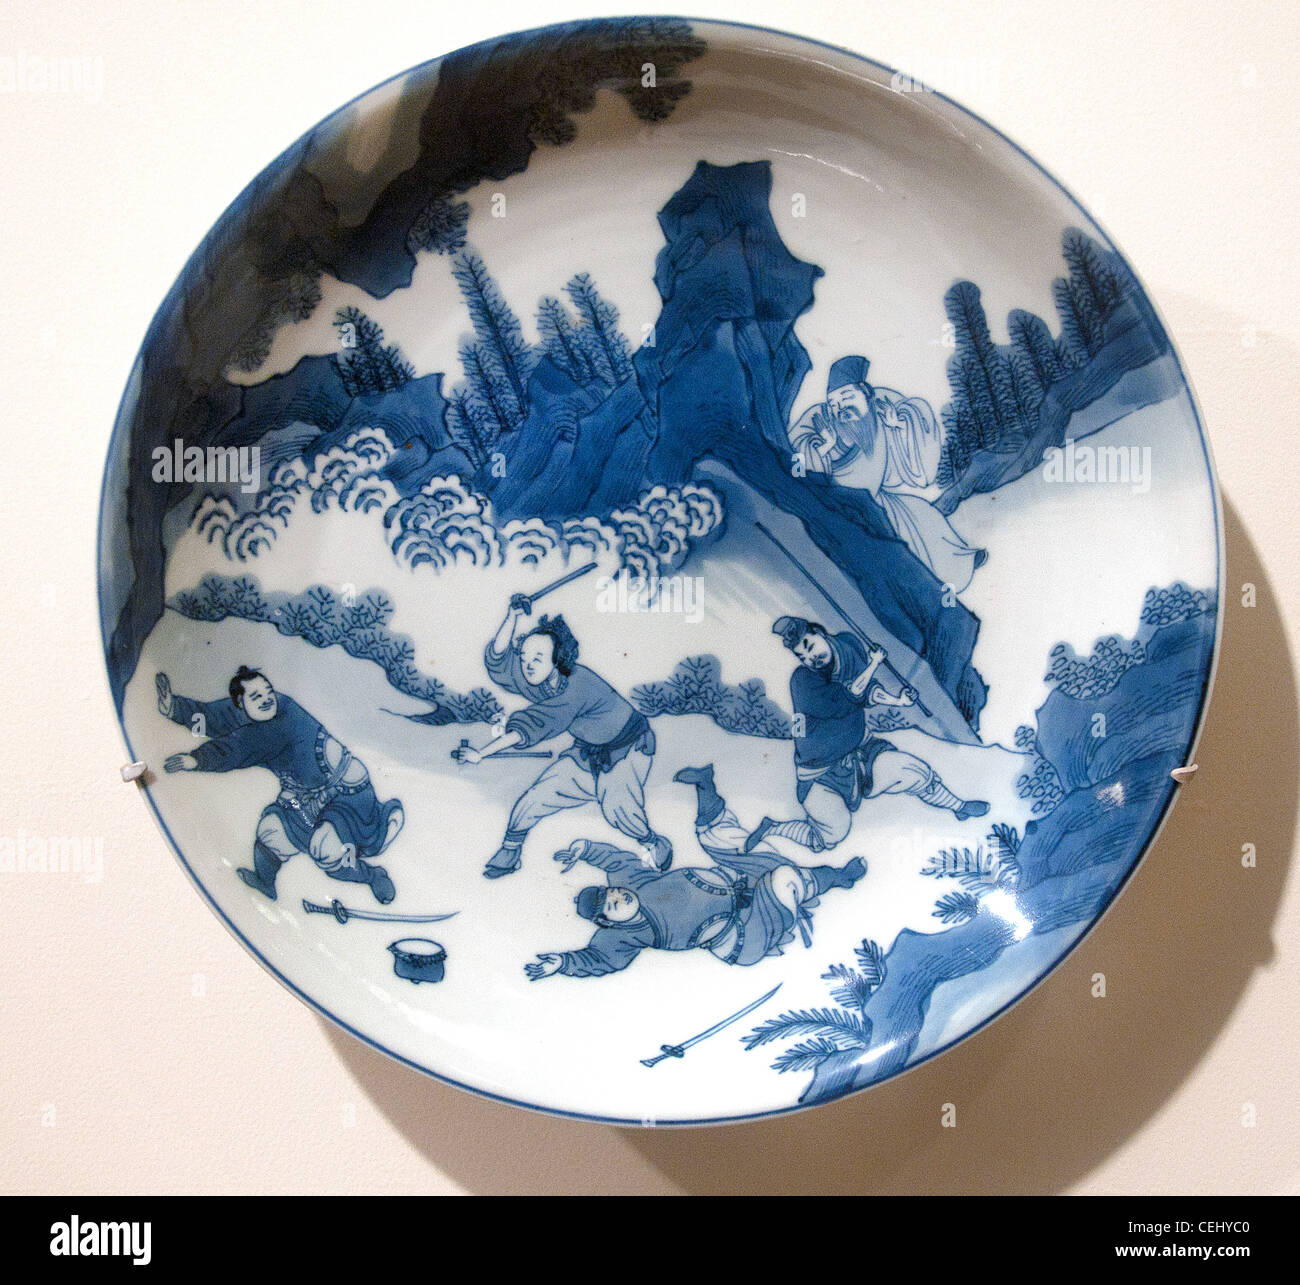 Plat decor of characters struggling porcelain Plate  Qing Dynasty Kangxi Period 1662 - 1722 China Chinese Stock Photo